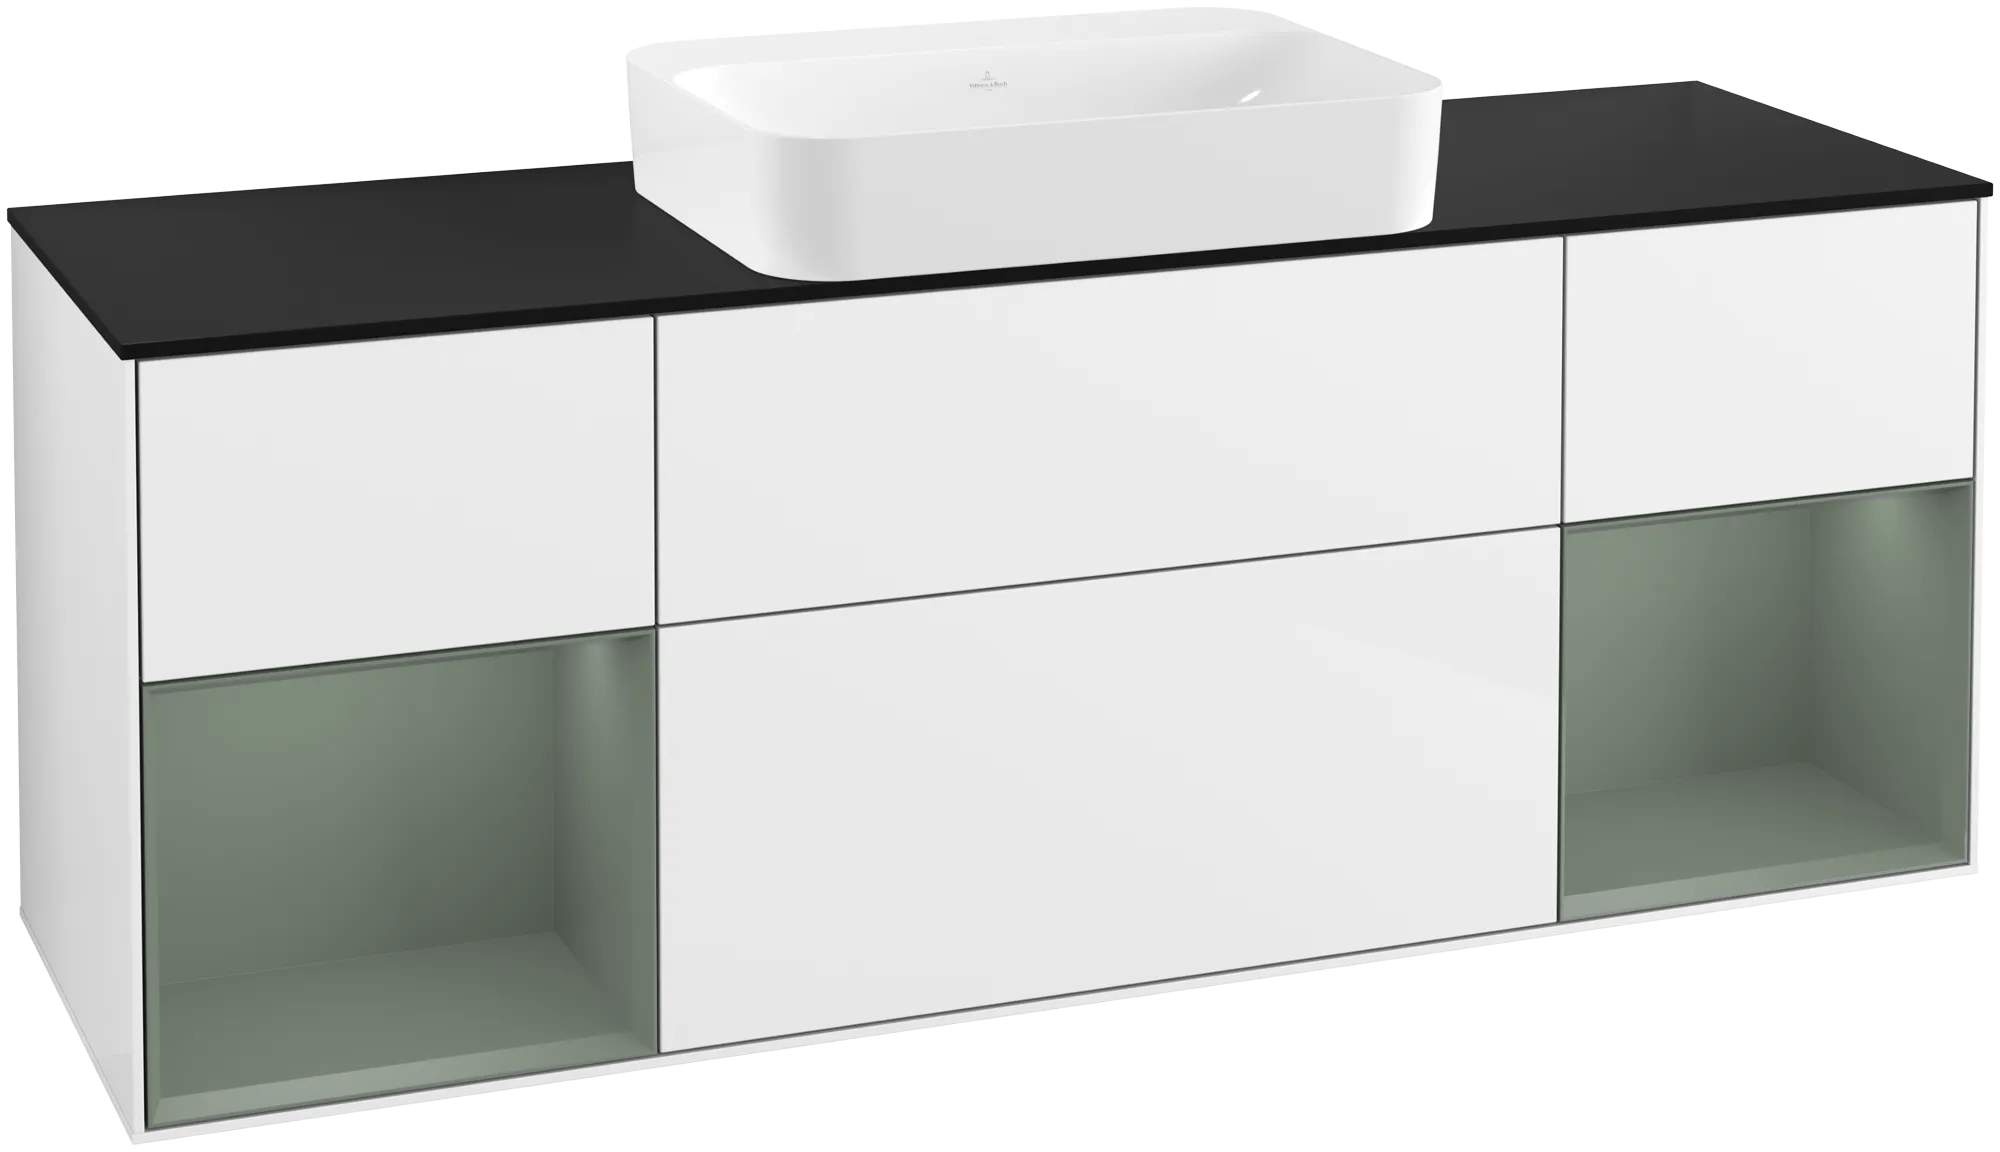 VILLEROY BOCH Finion Vanity unit, with lighting, 4 pull-out compartments, 1600 x 603 x 501 mm, Glossy White Lacquer / Olive Matt Lacquer / Glass Black Matt #G742GMGF resmi